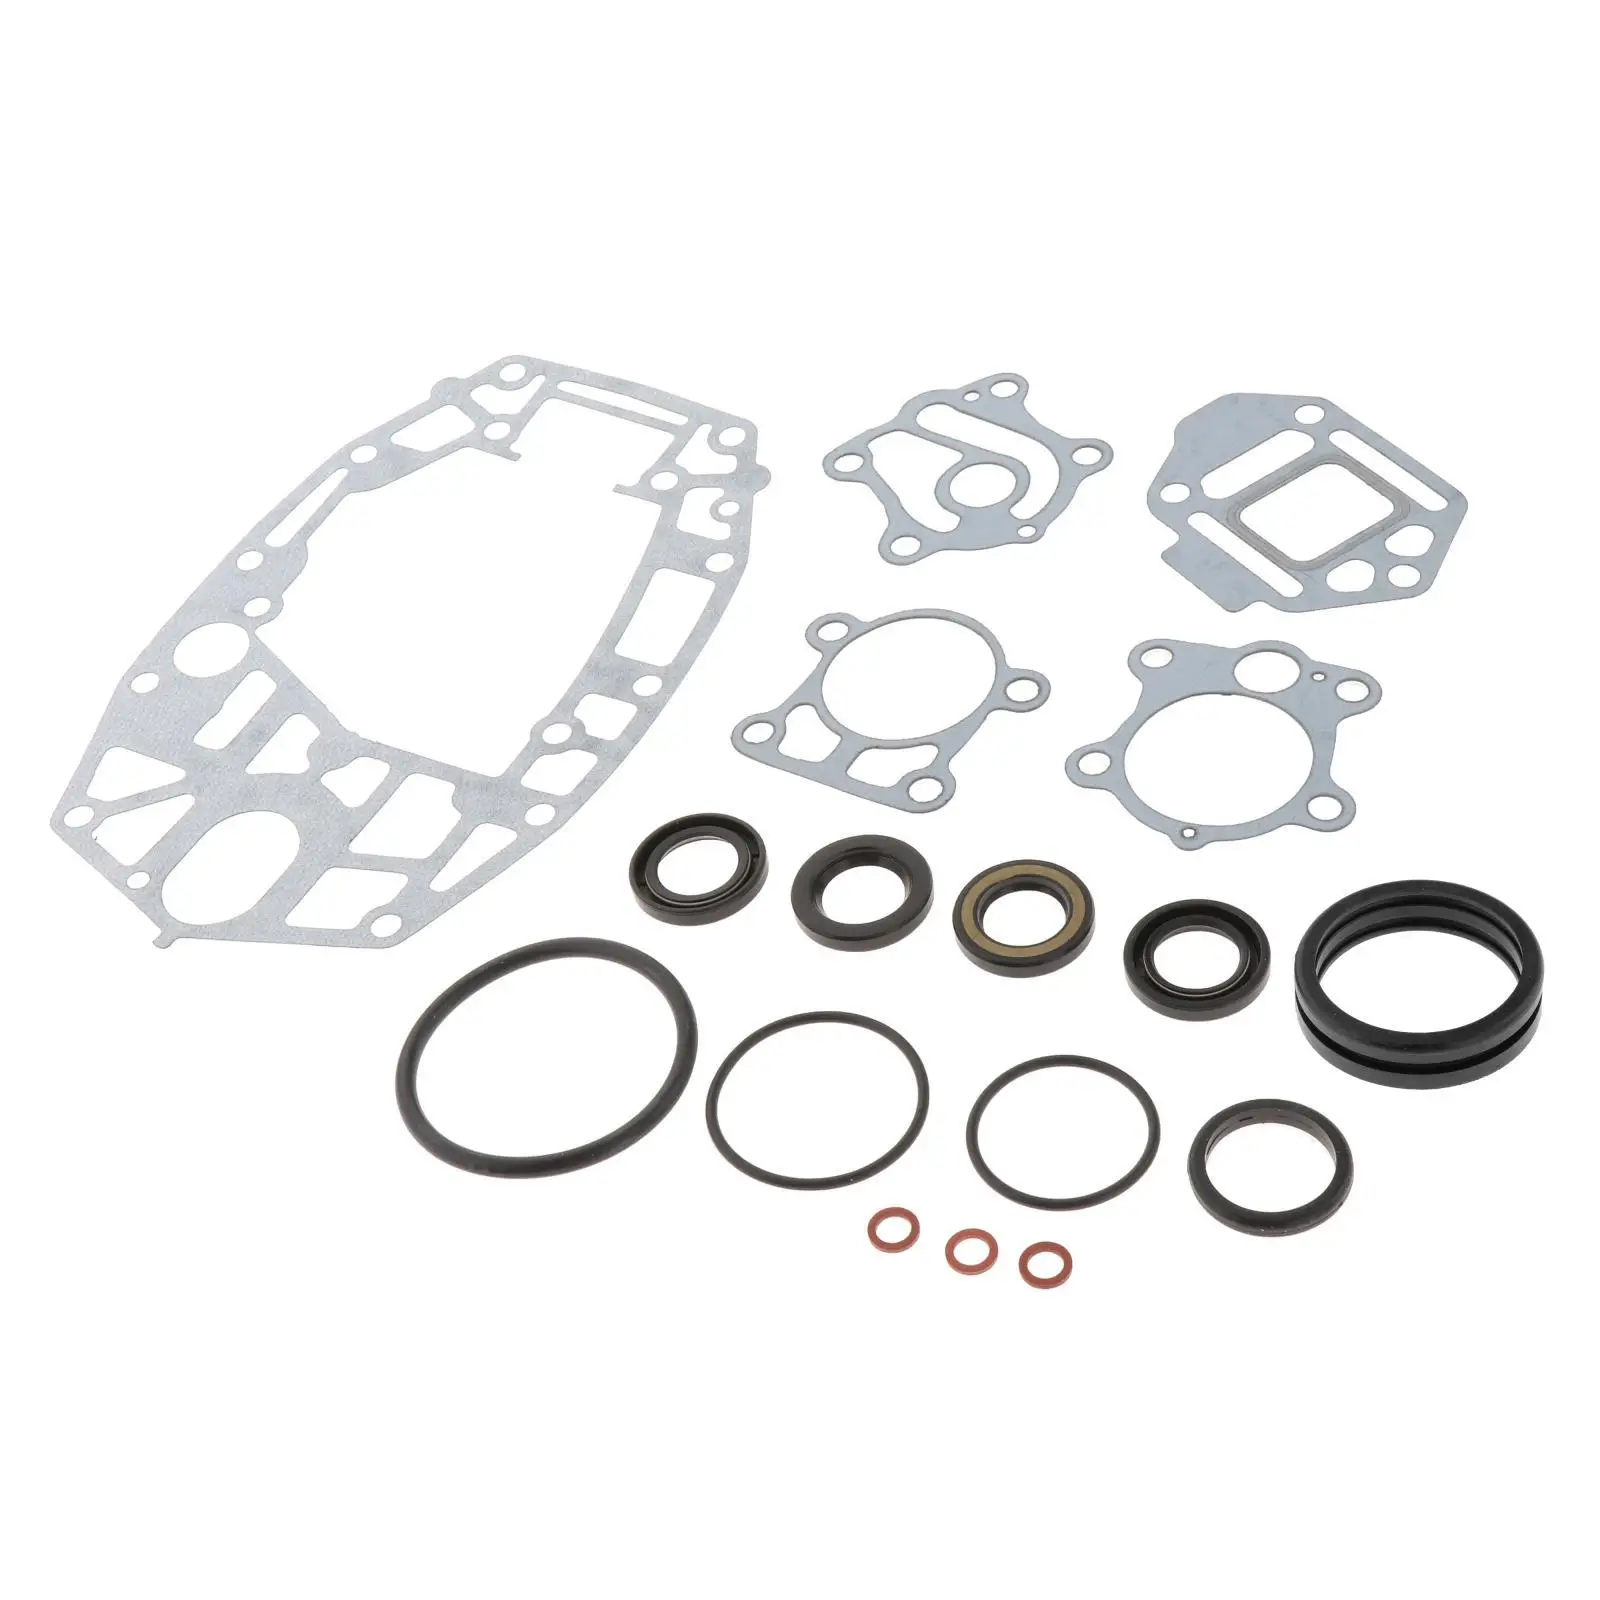 6H4-W0001-20-00 Lower Unit Seal Kit, Gearcase 18-2792 6H4-W0001-21-00 for Yamaha